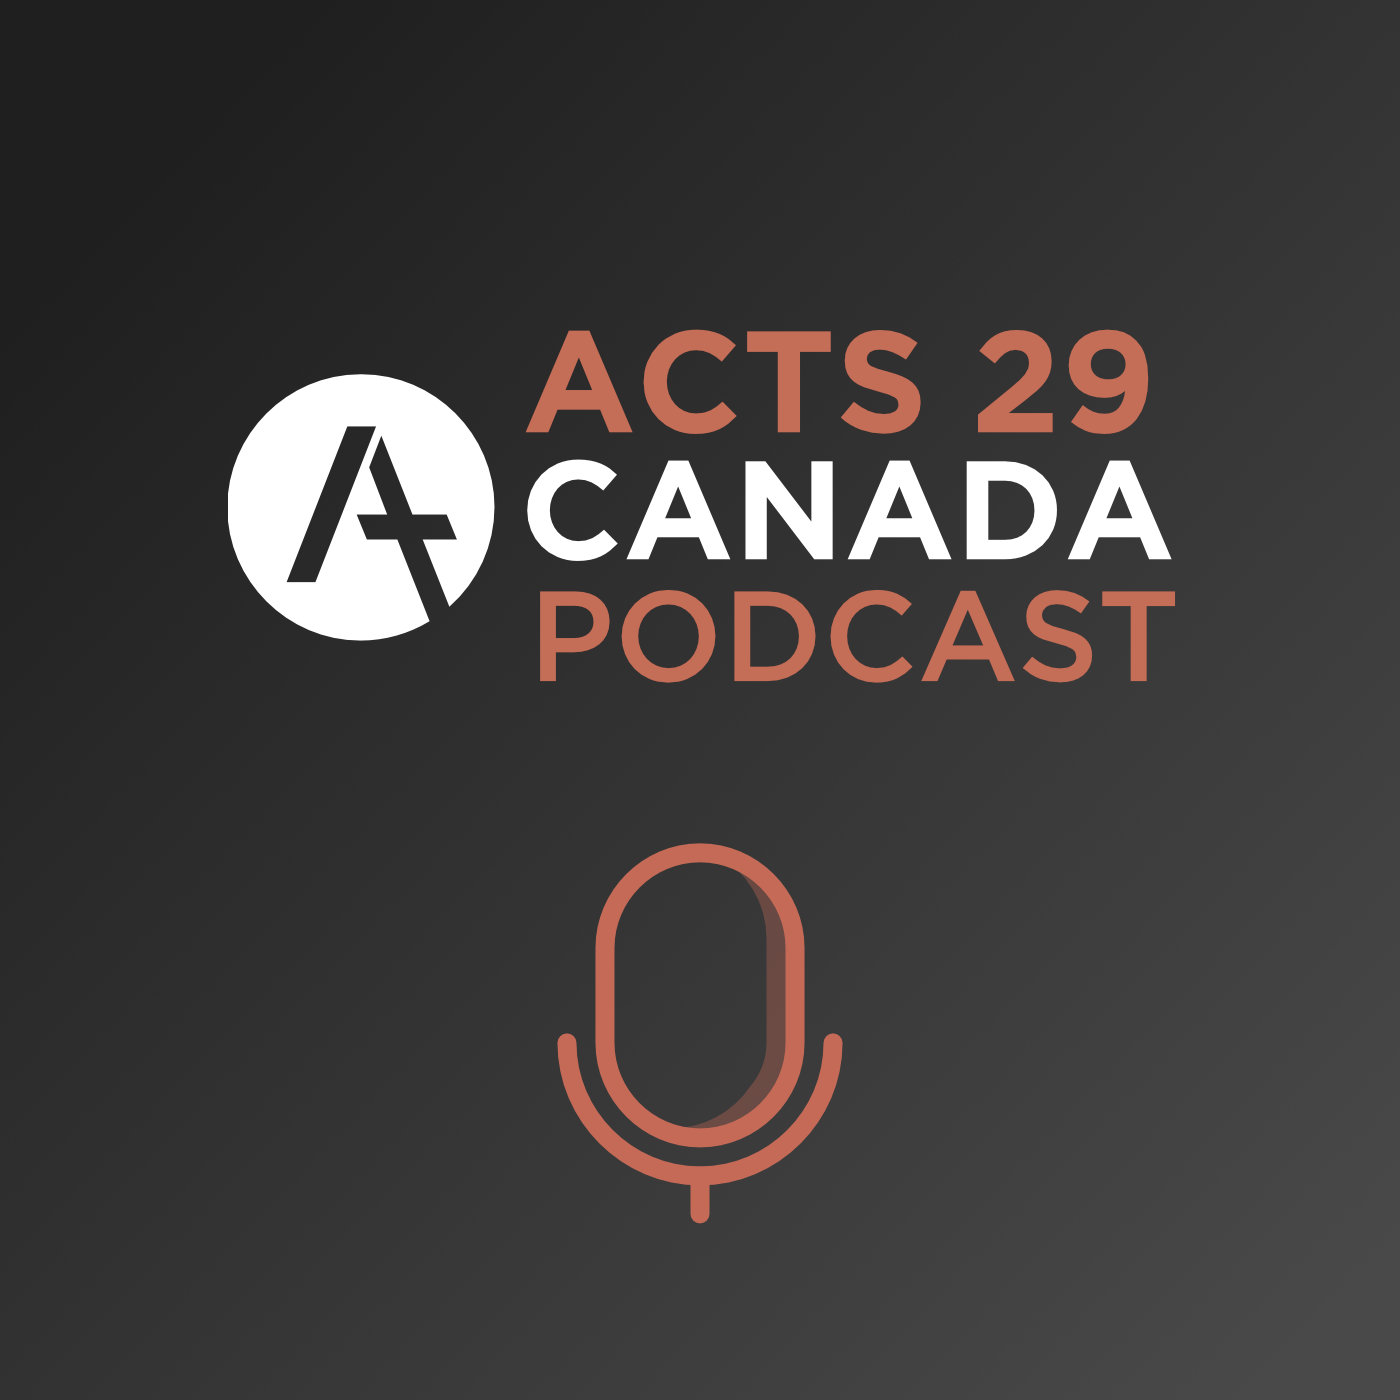 Acts 29 Canada Podcast